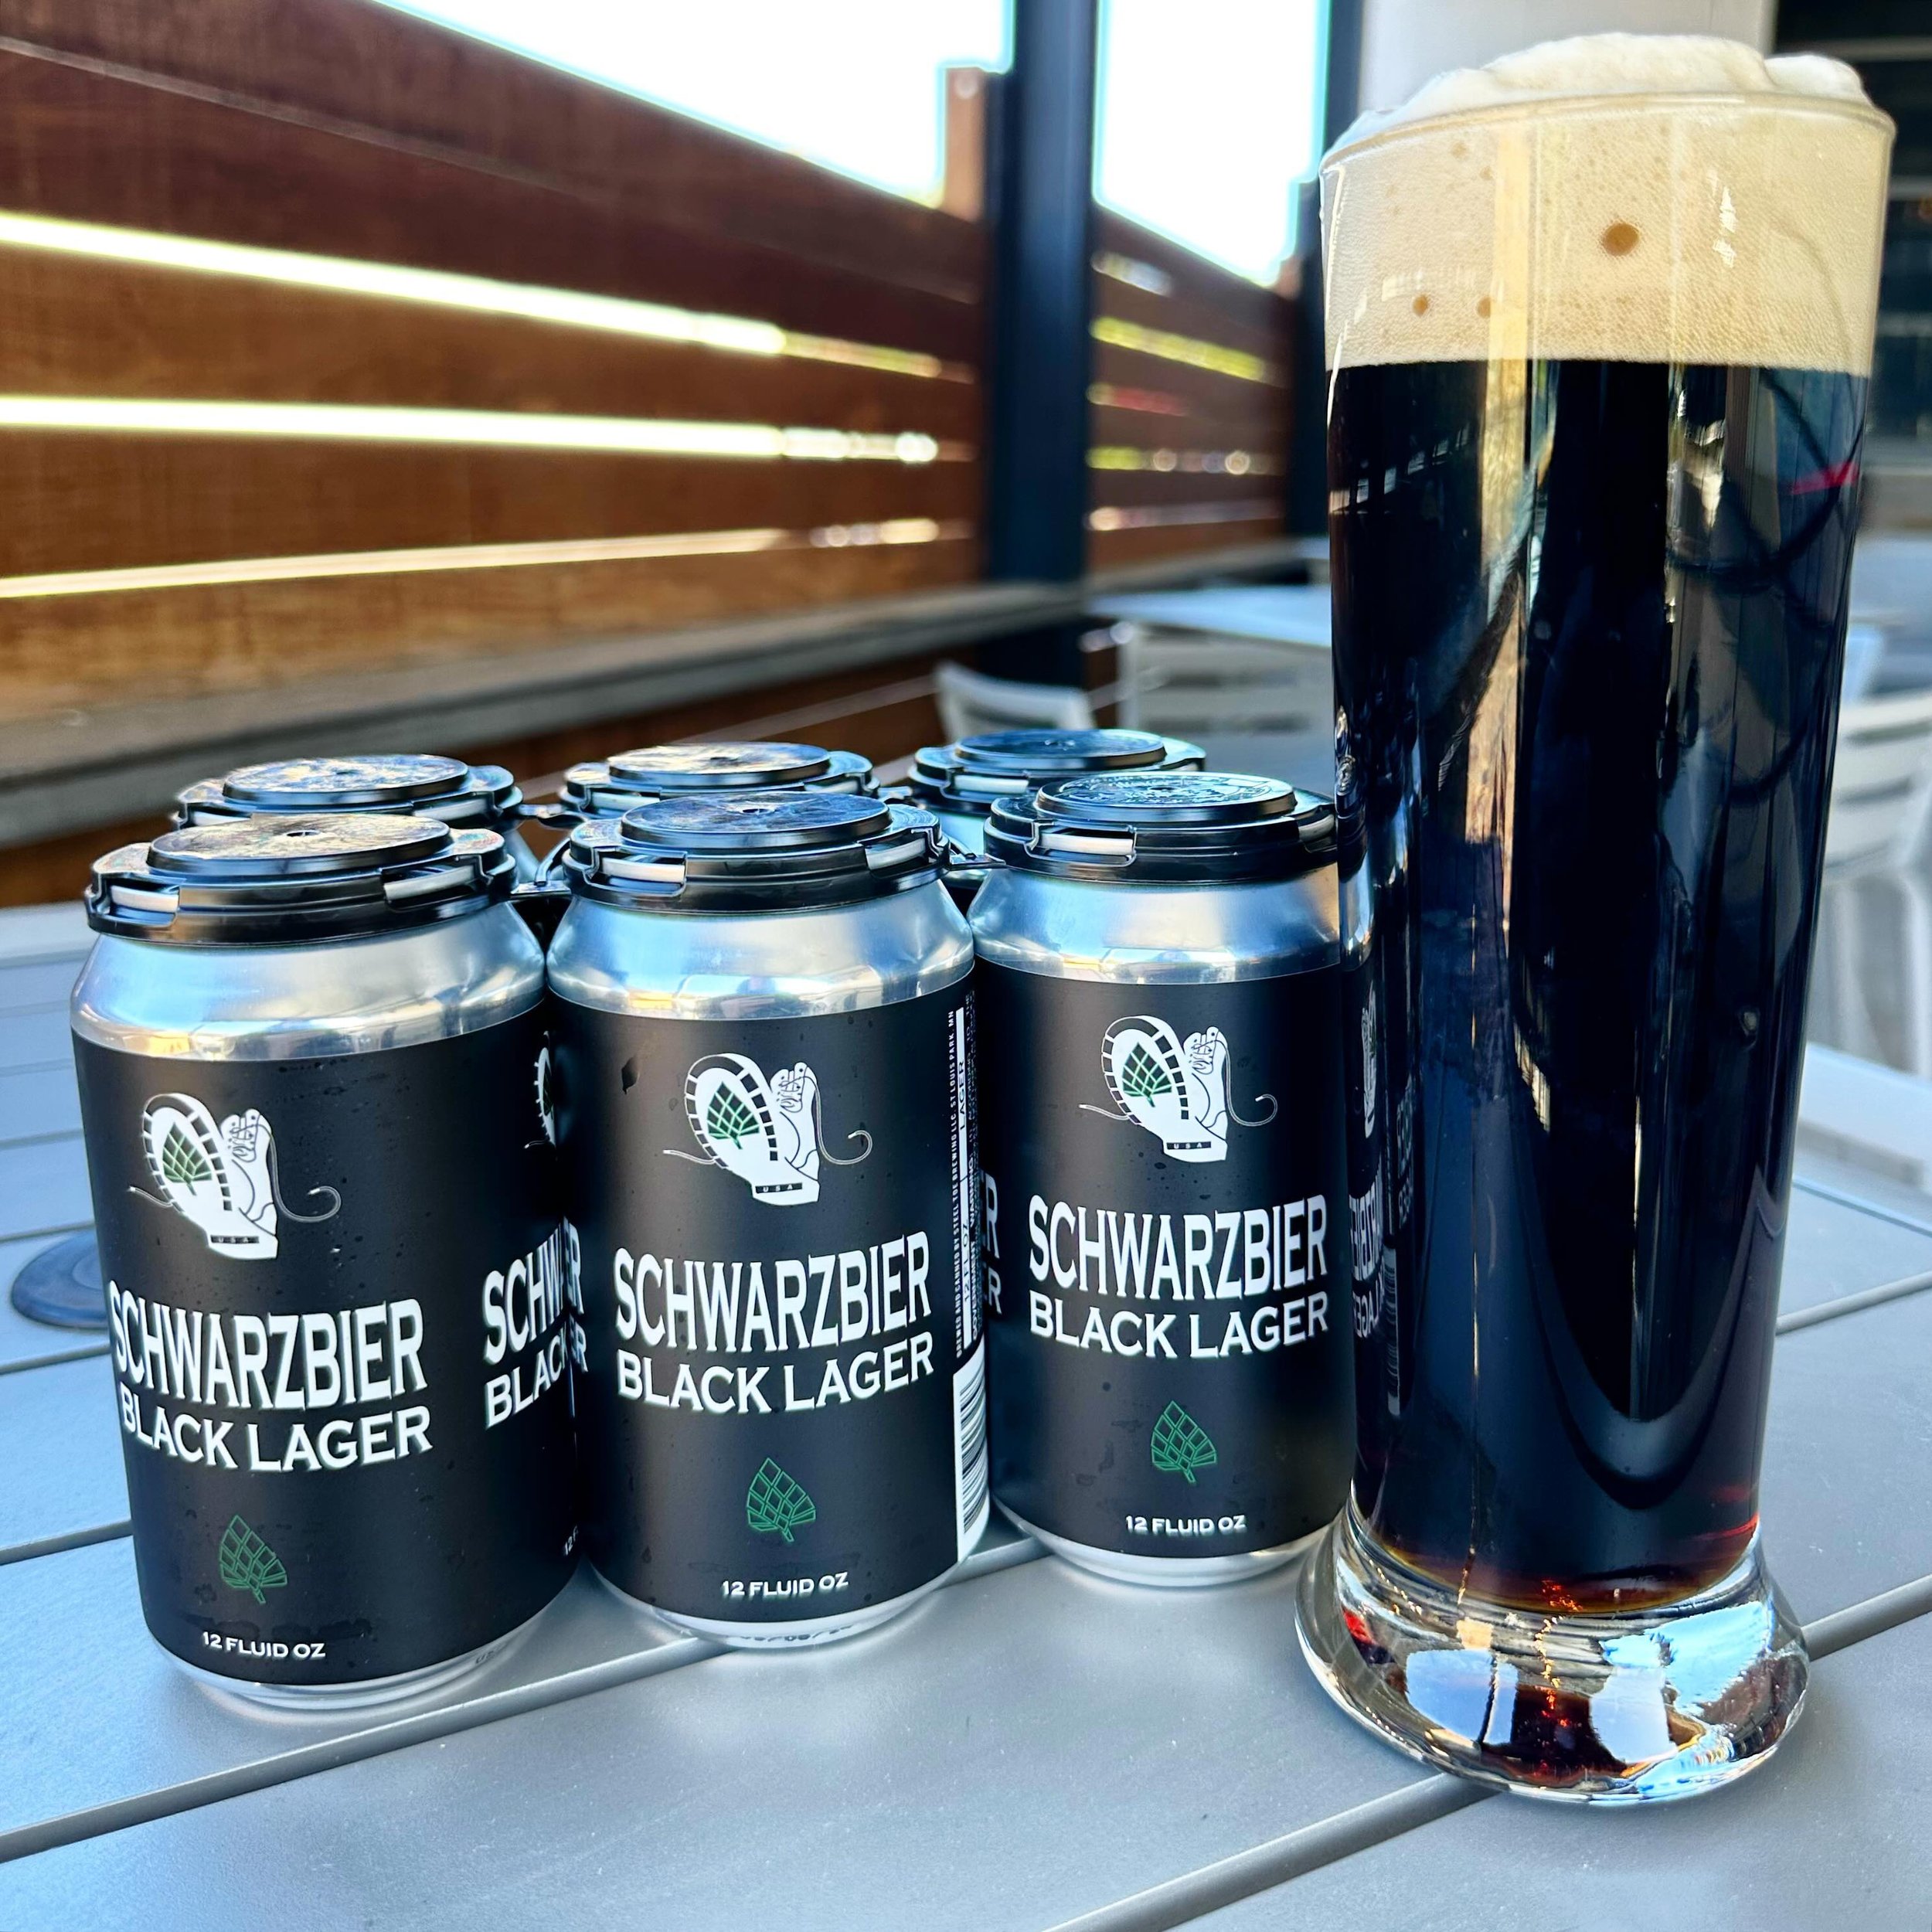 ⚫️🍺 Schwarzbier Black Lager is back today!! 🍻⚫️

Black in color with aromas of roasted cacao and floral hops. Dark chocolate and mild coffee flavors with a dry crisp finish! Very mild bitterness and supremely drinkable! 5.5% ABV

Pouring on draft t